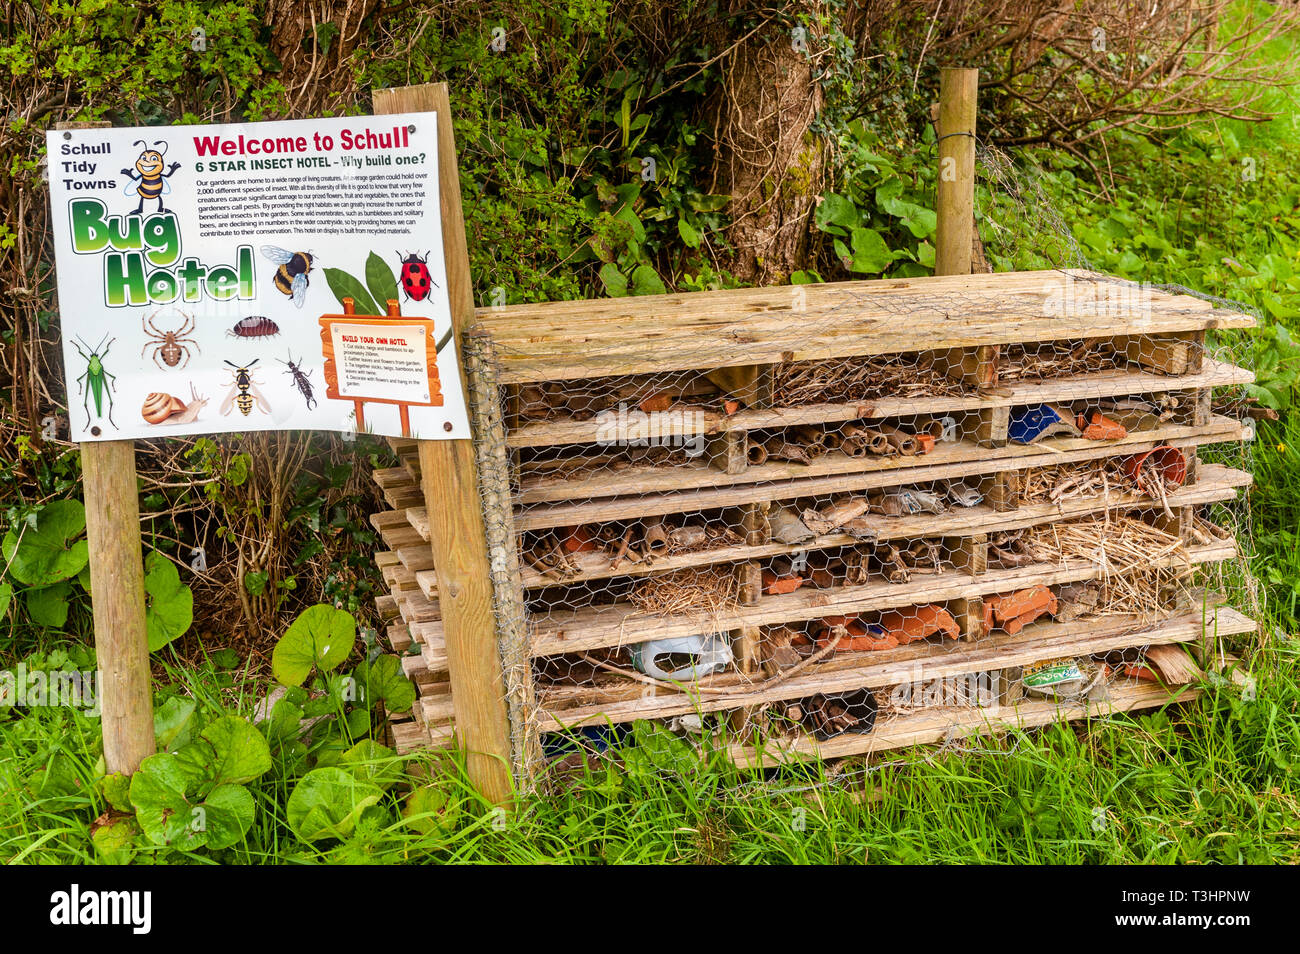 Bug hotel made from pallets and various materials built by Schull Tidy Towns in Schull, West Cork, Ireland. Stock Photo